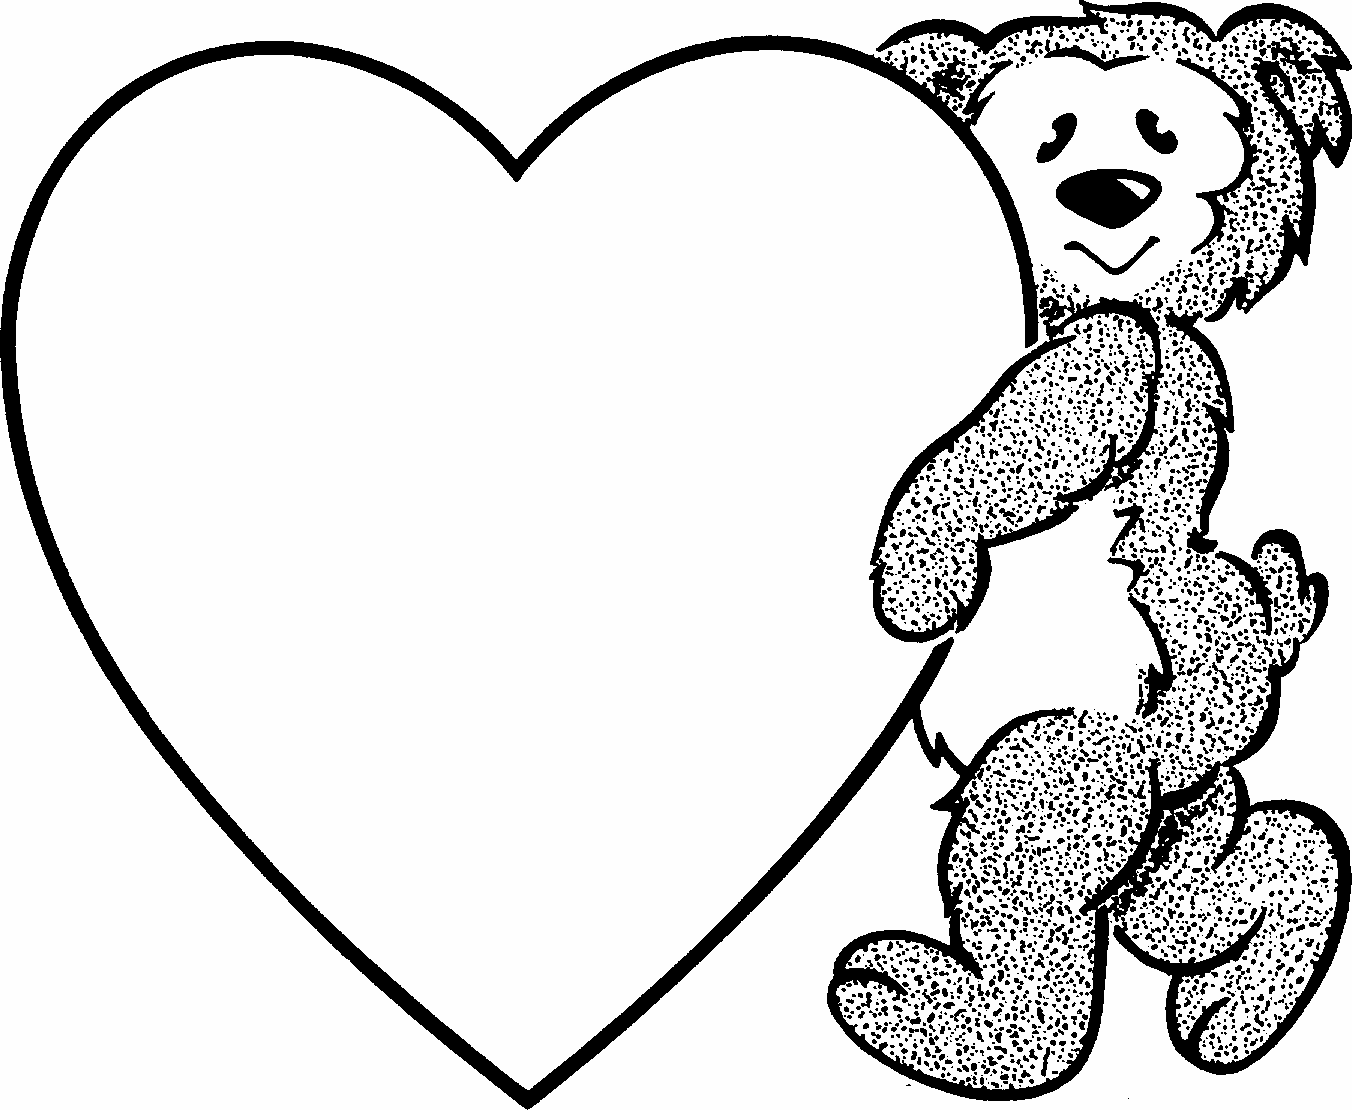 Valentines Hearts Free Printable Coloring Pages Archives - gobel ...